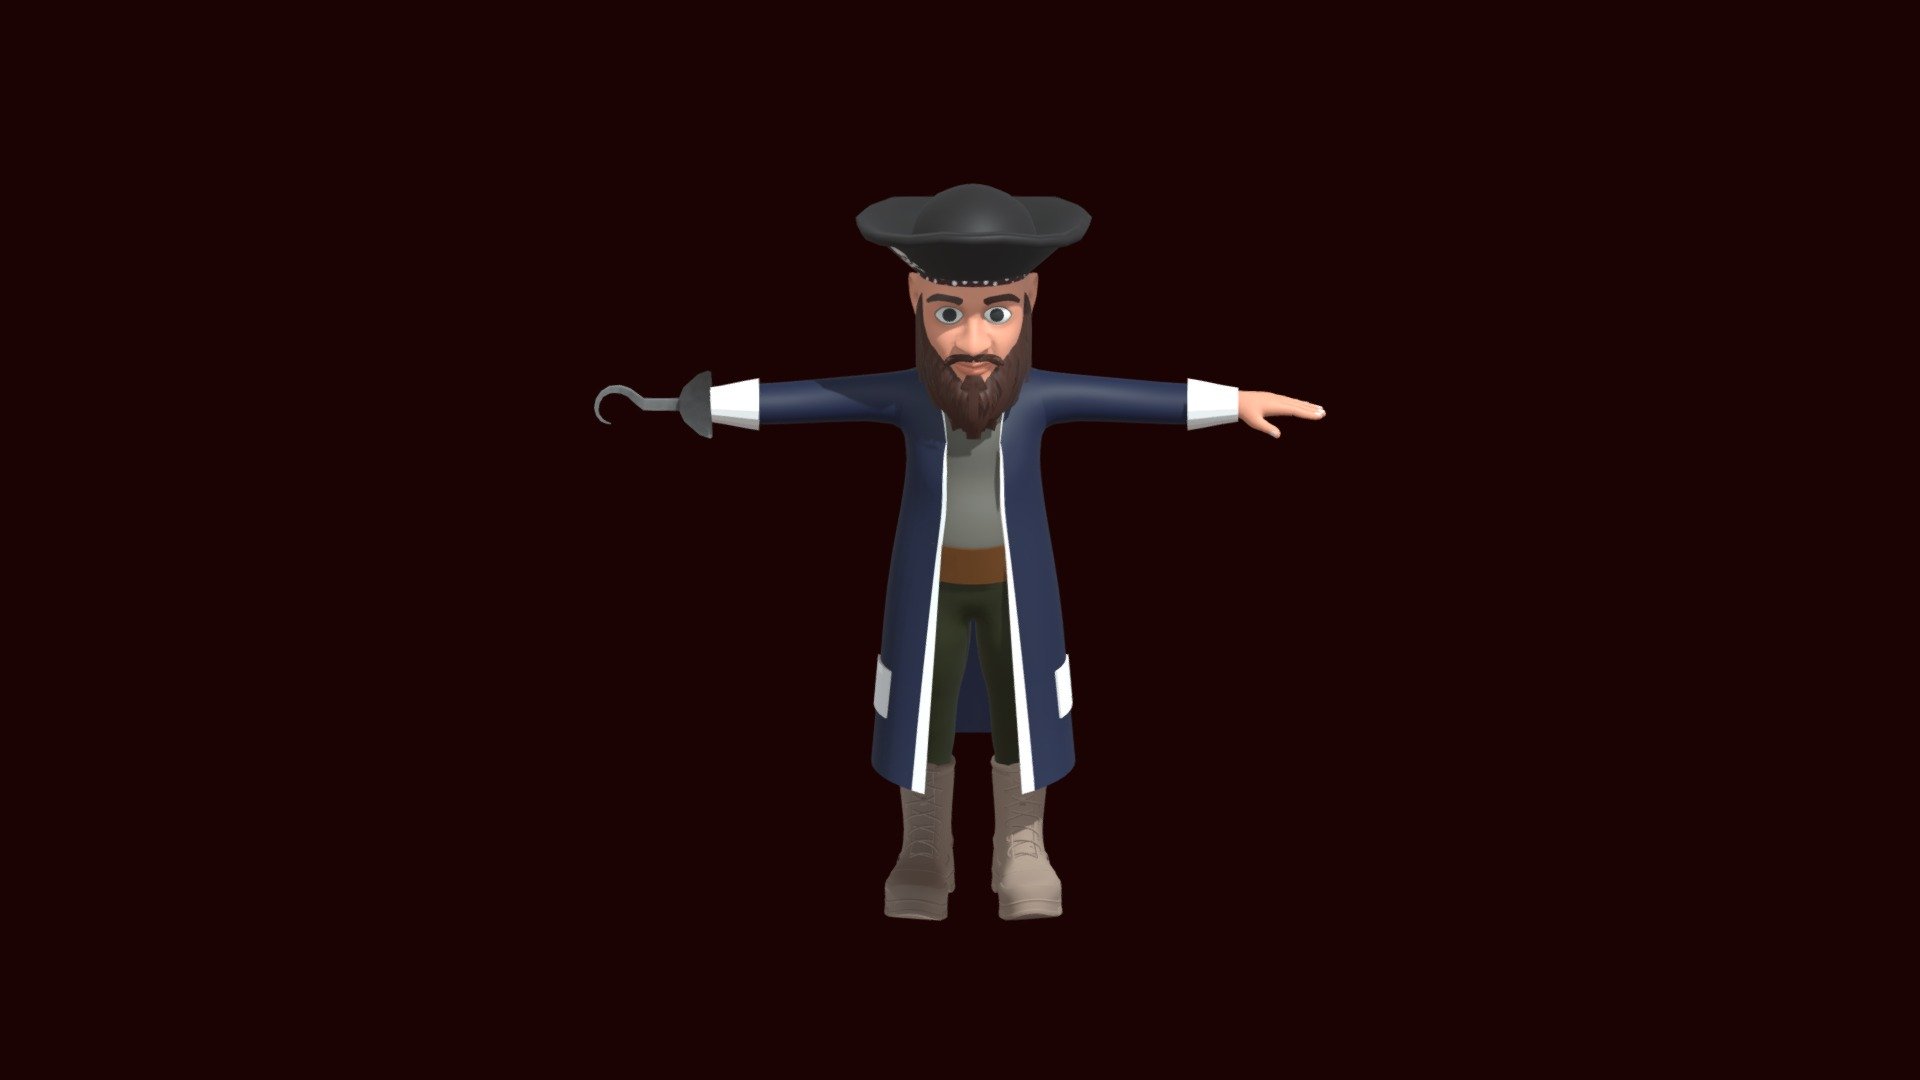 Cartoon pirates for gaming.
Texure included 3d model